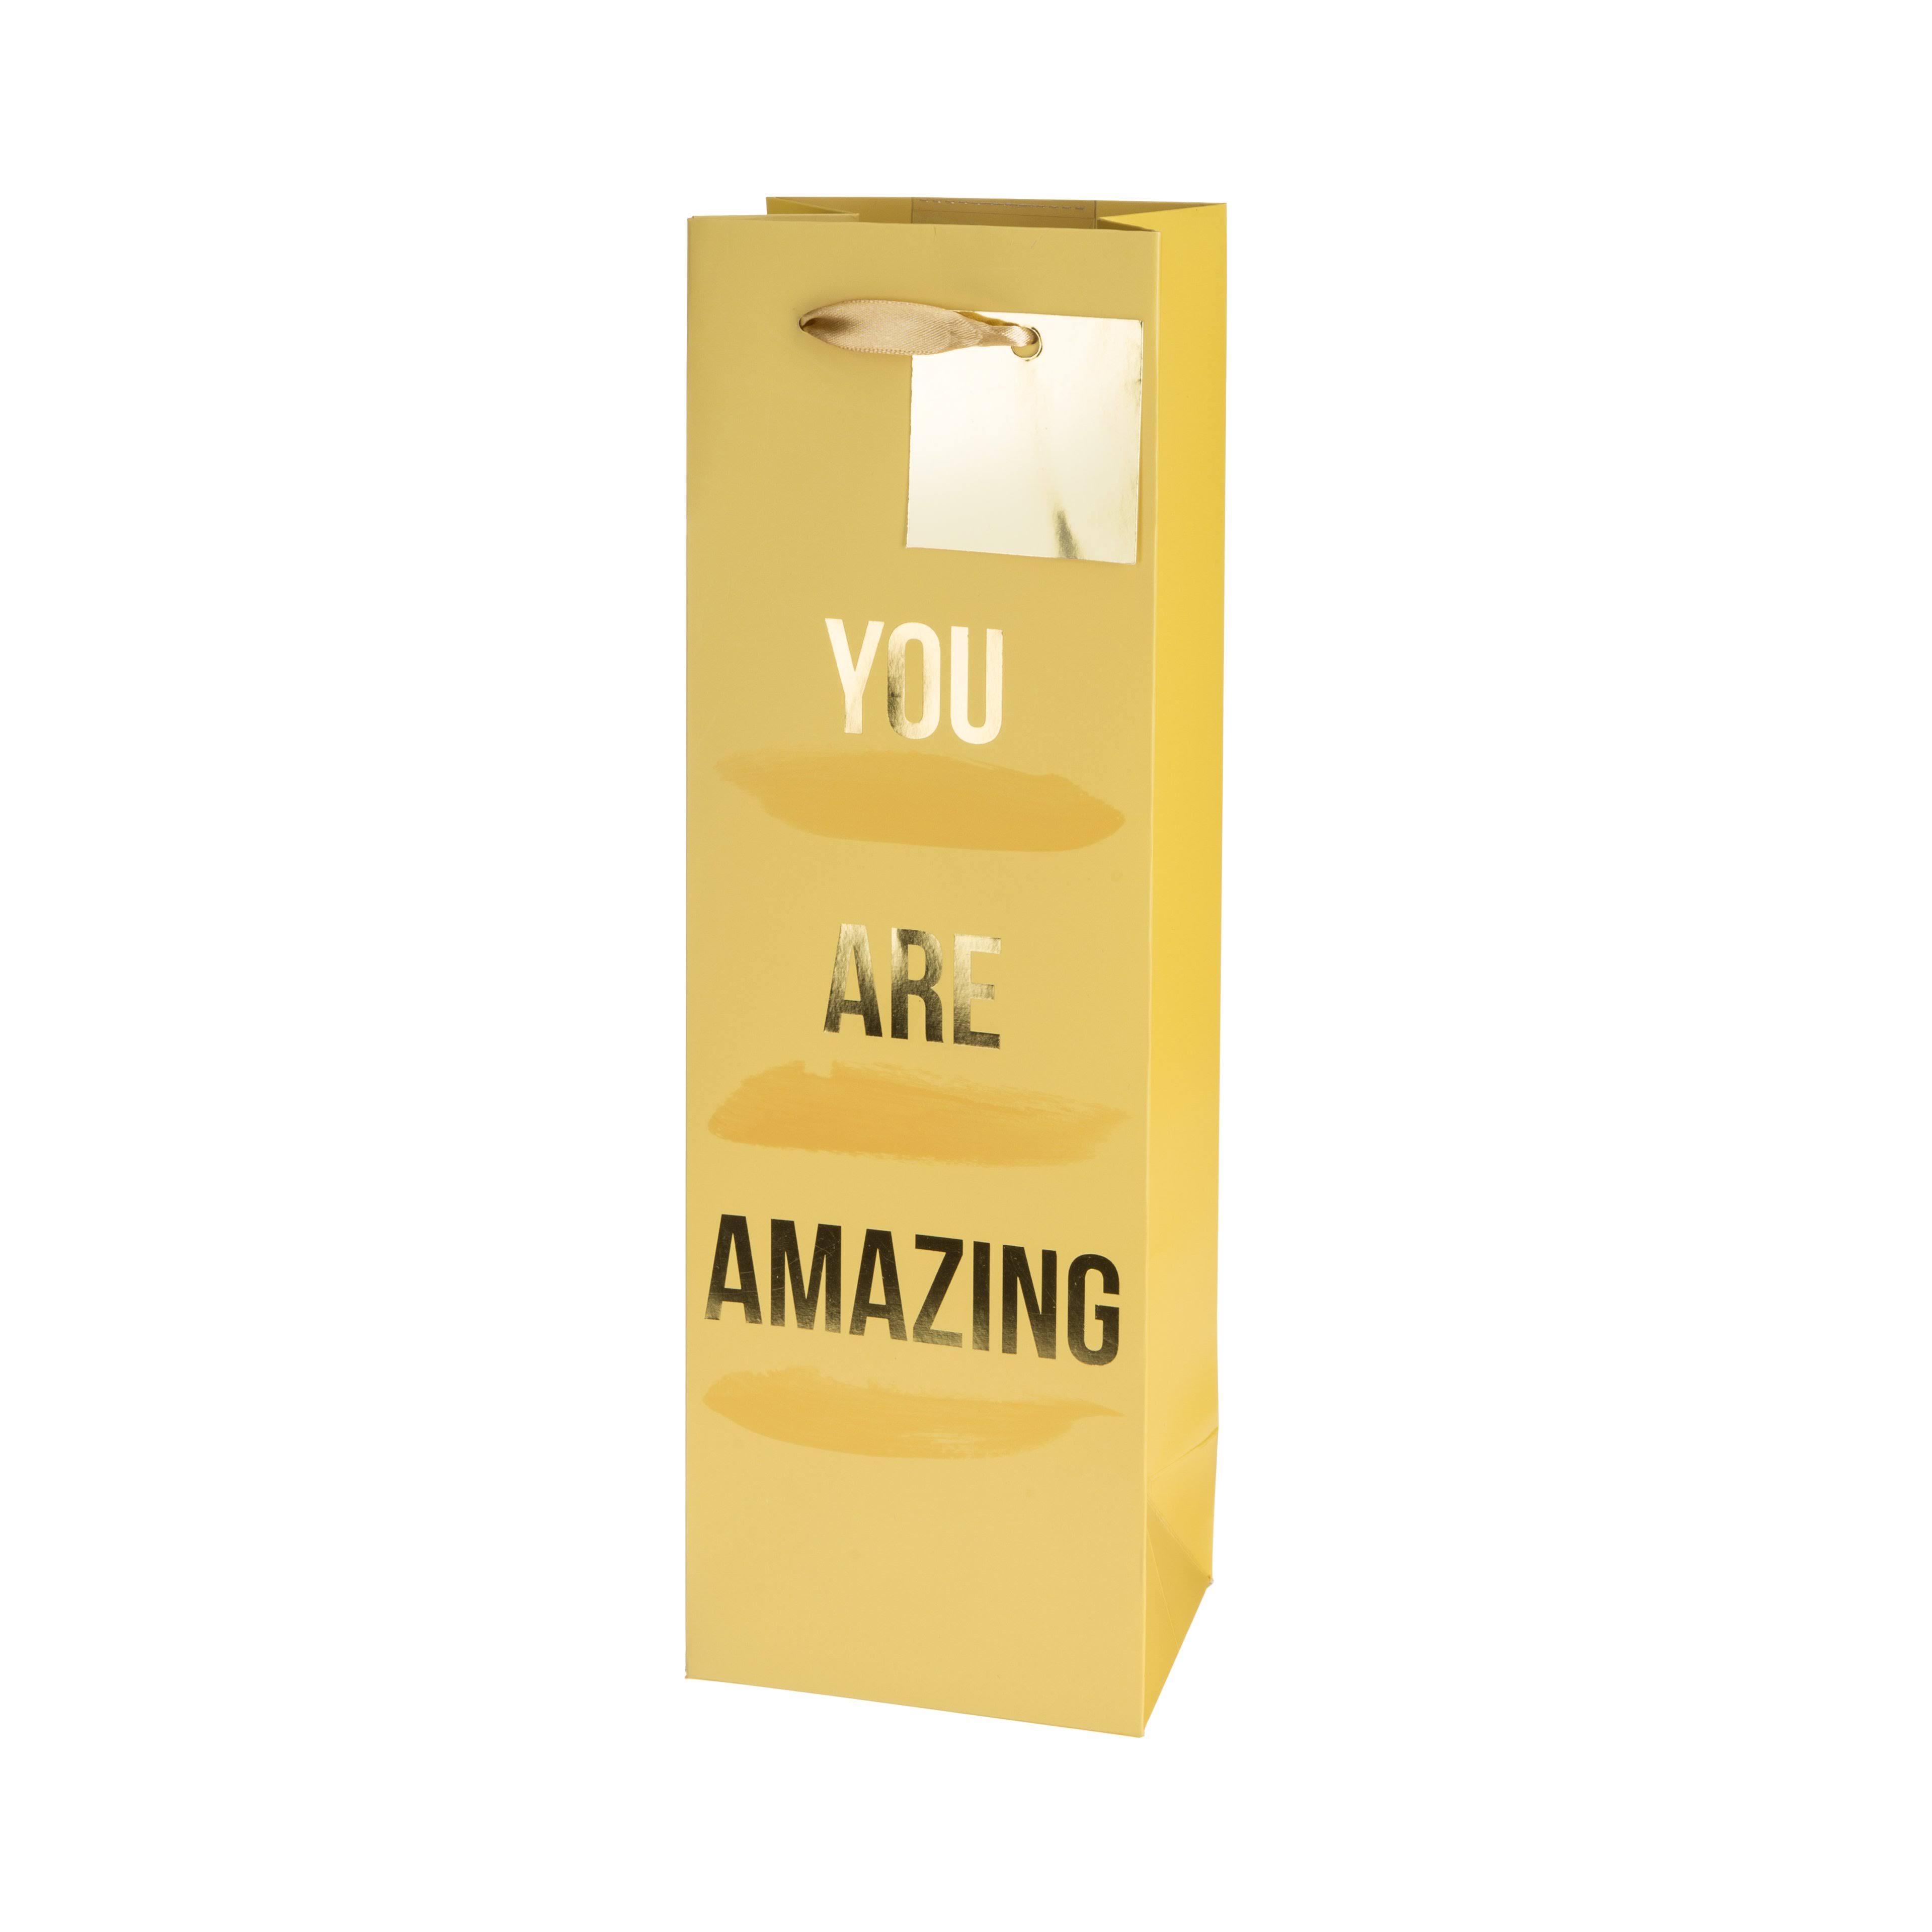 You Are Amazing Single-Bottle Wine Bag by Cakewalk Yellow Paper Gift Bags